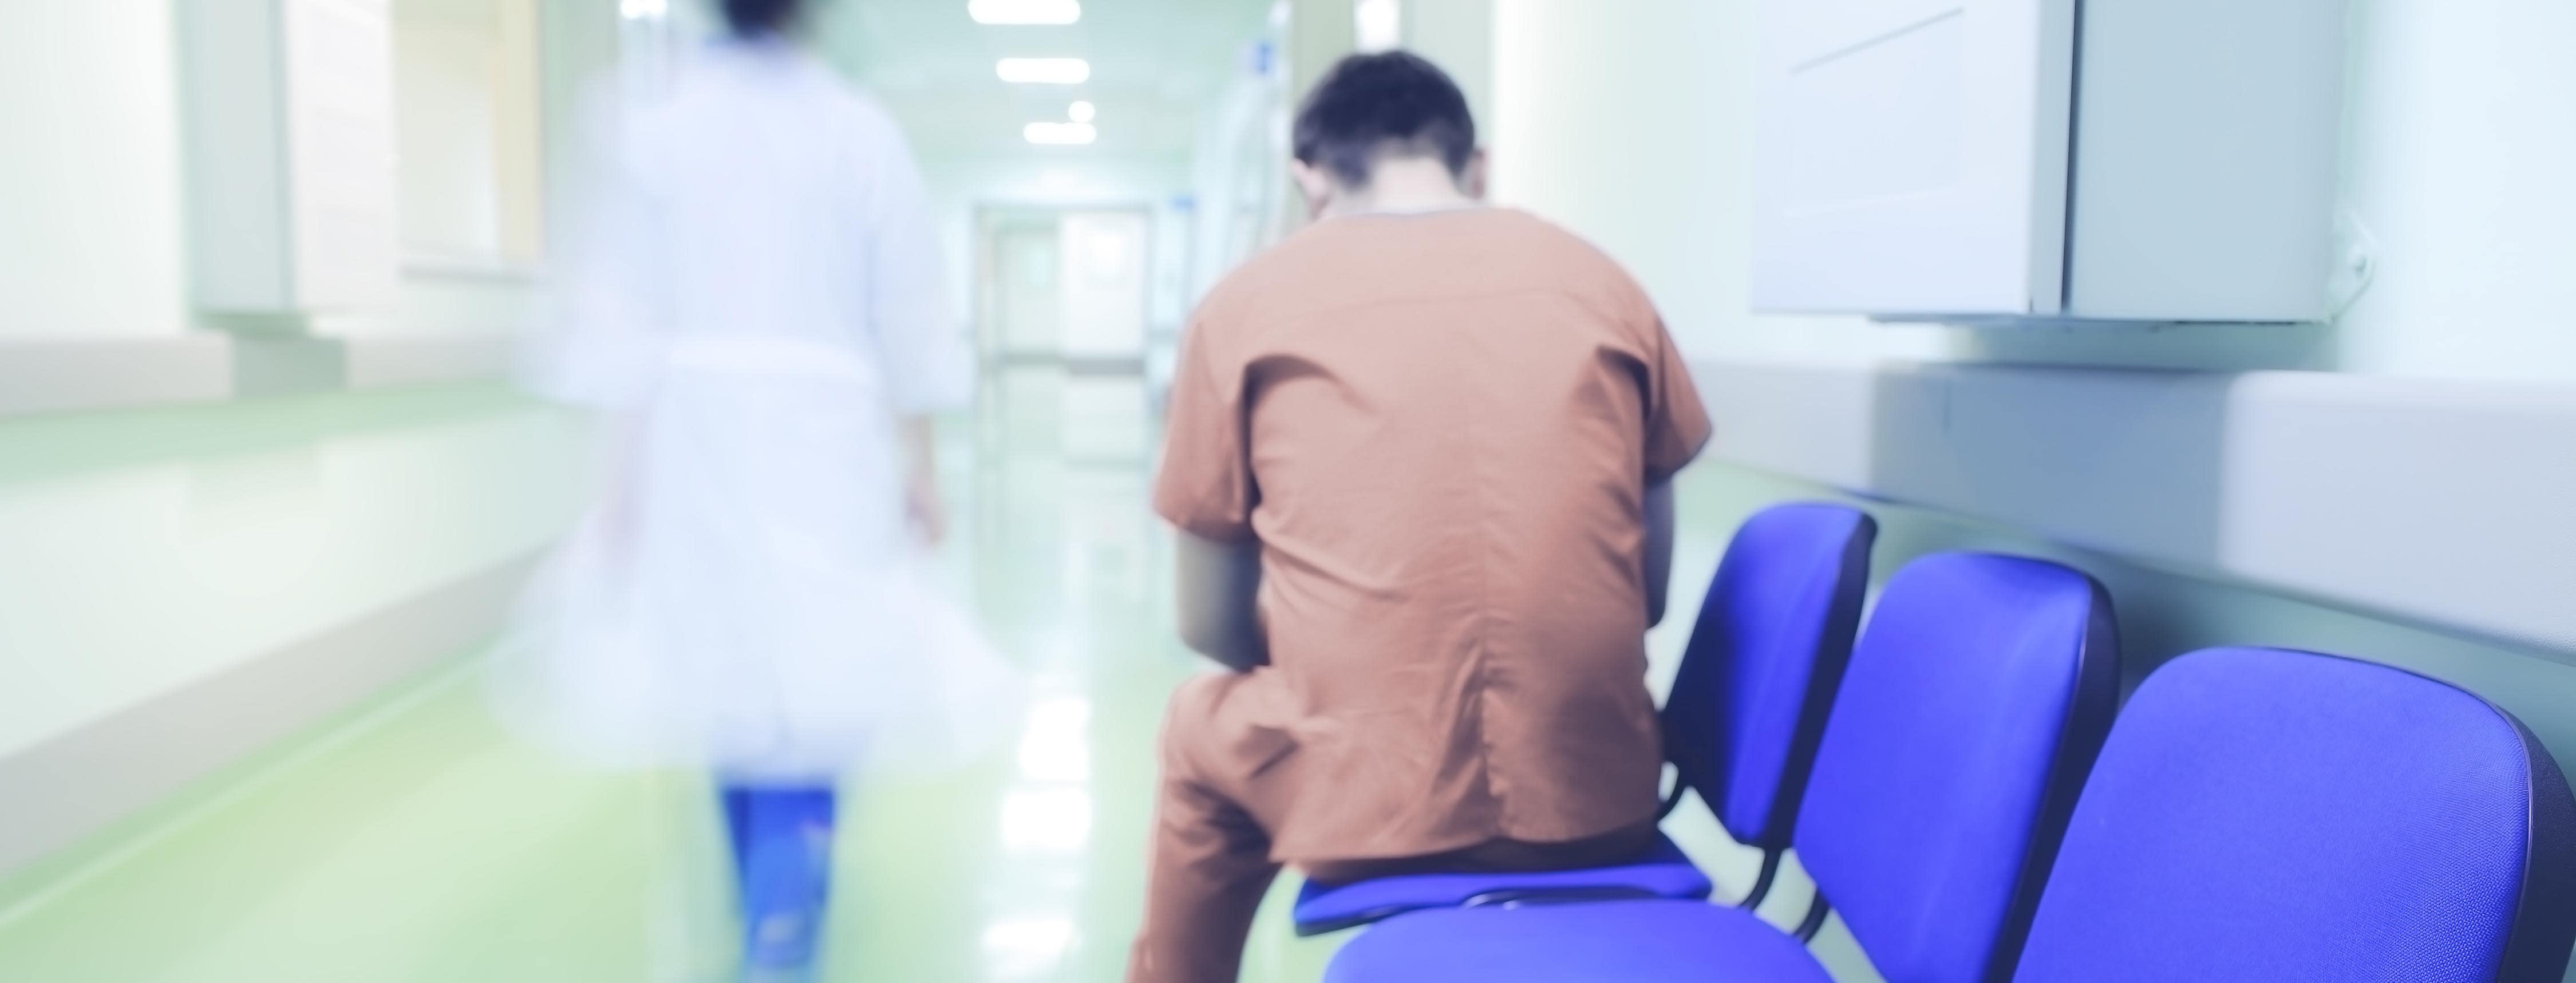 Only 16% of patients sought mental health detention review